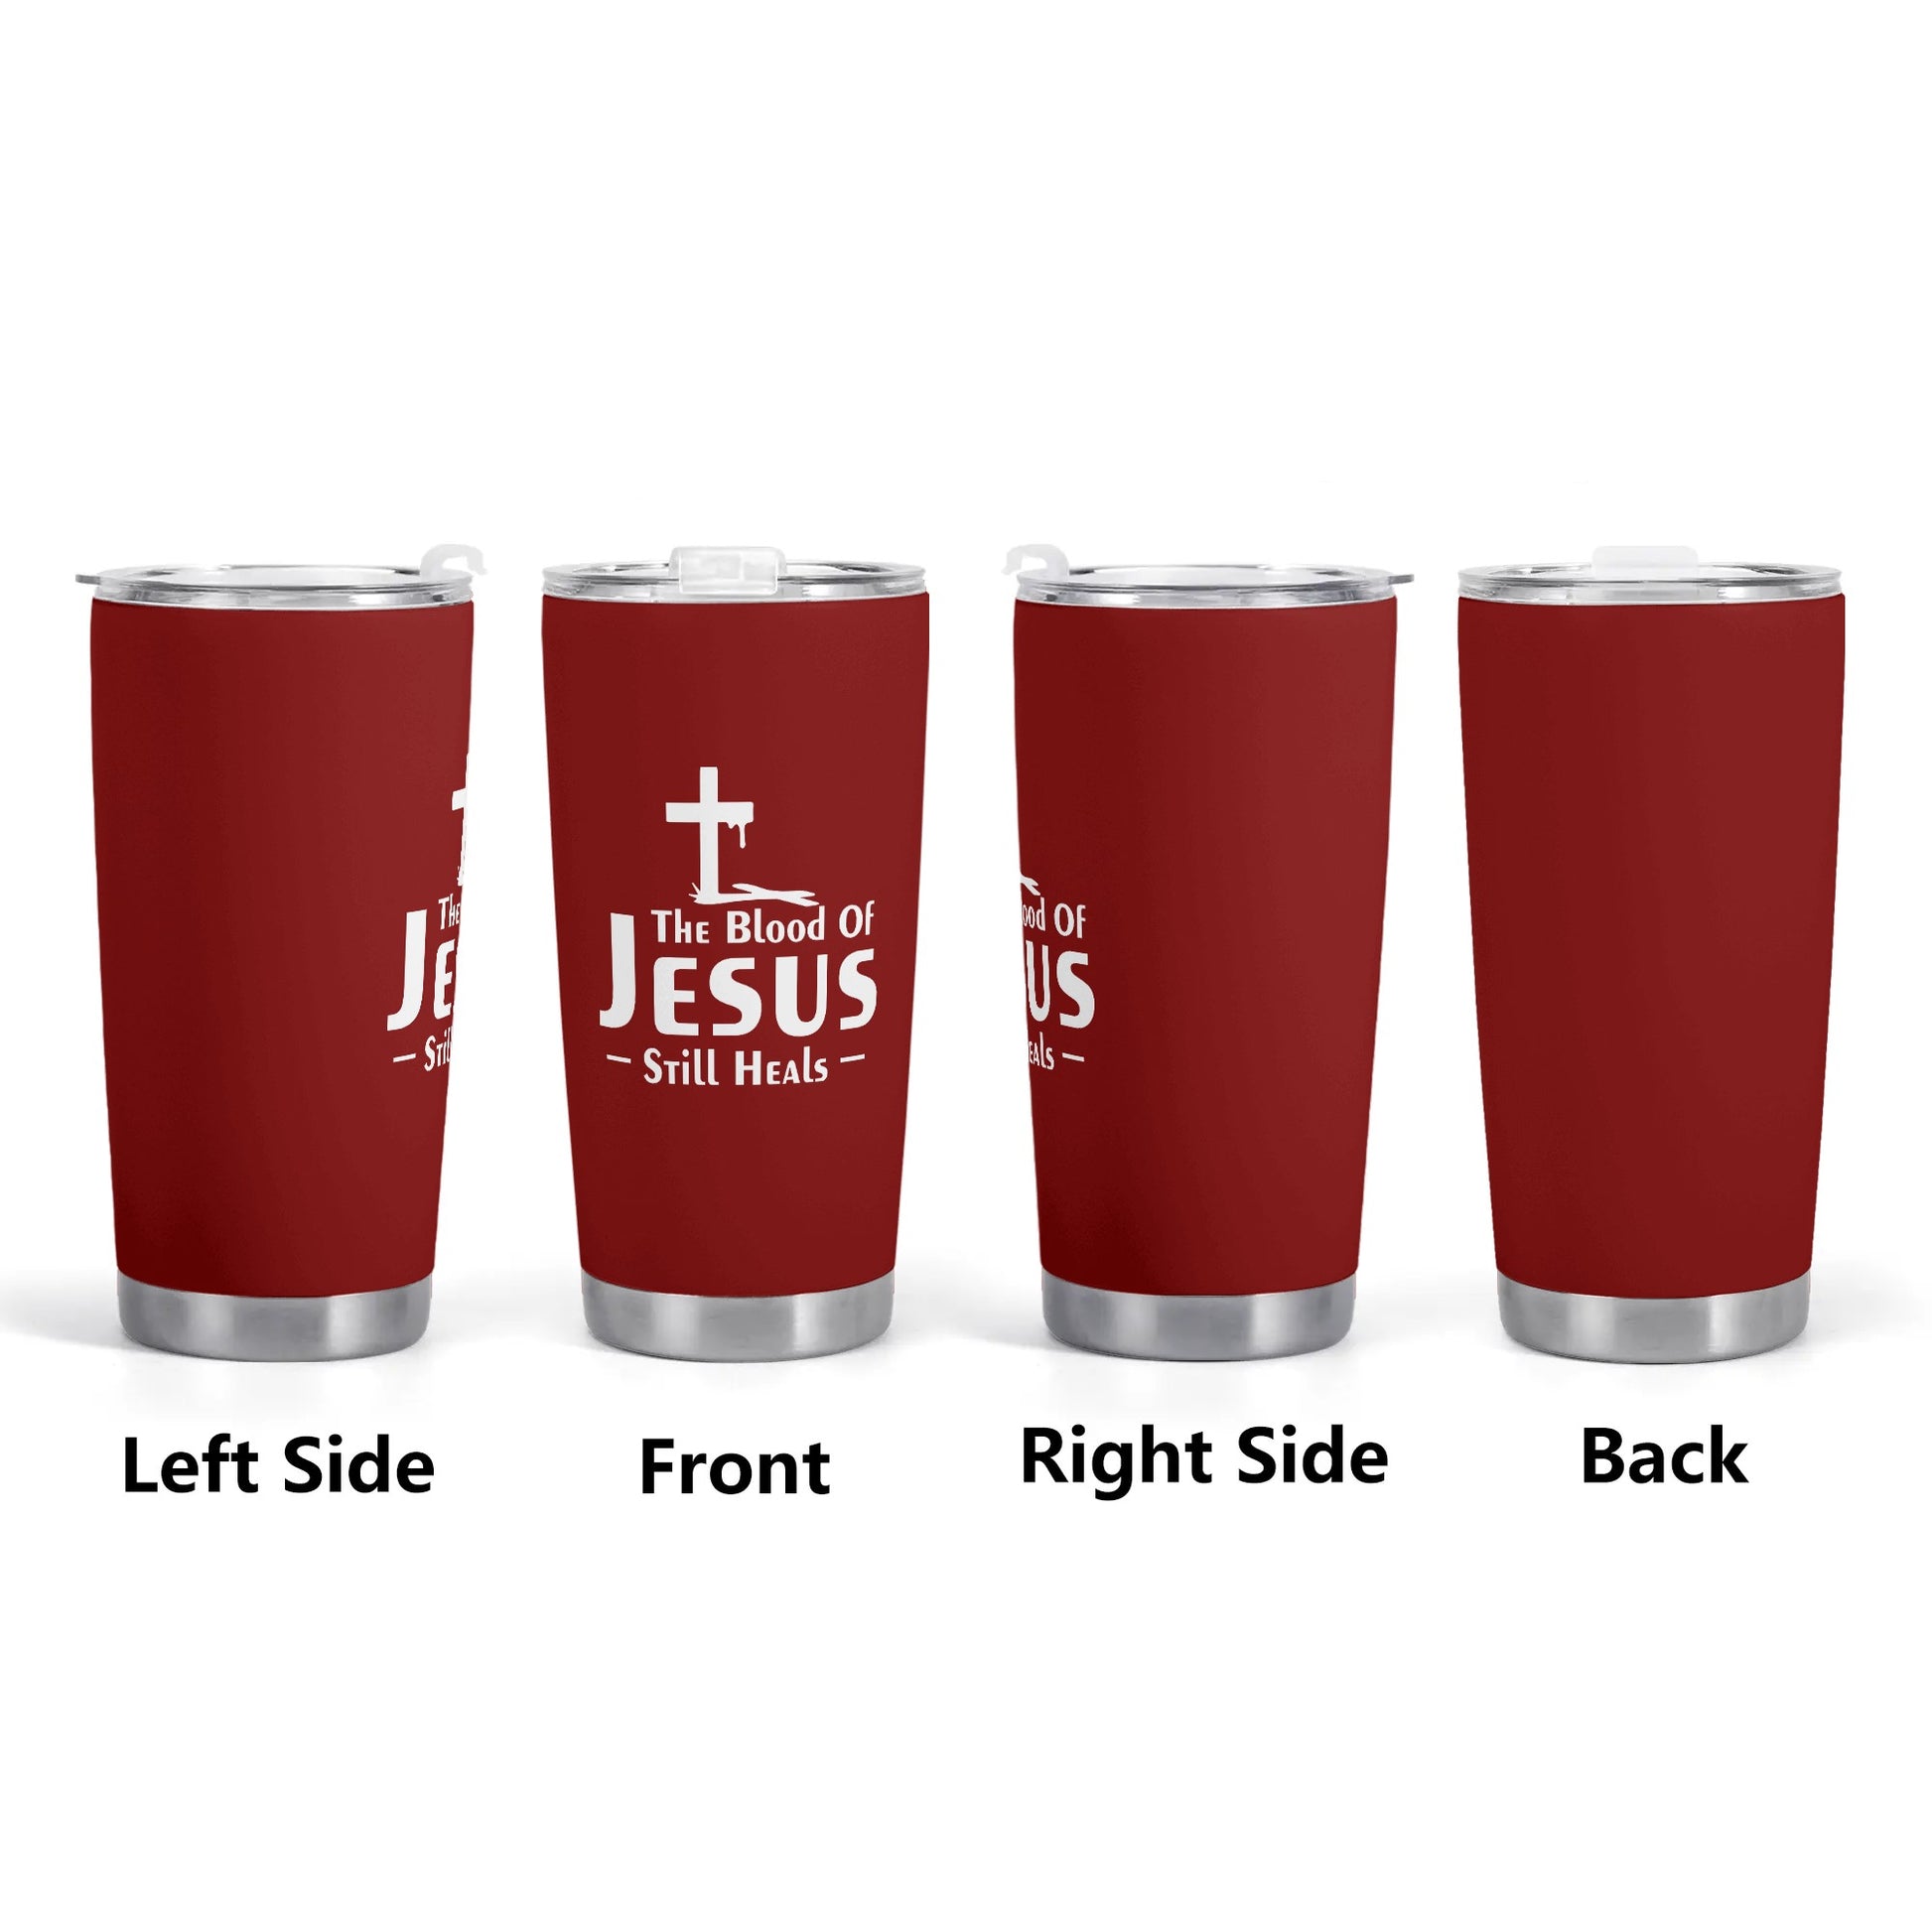 The Blood Of Jesus Still Heals Christian Stainless Steel Tumbler 20oz popcustoms